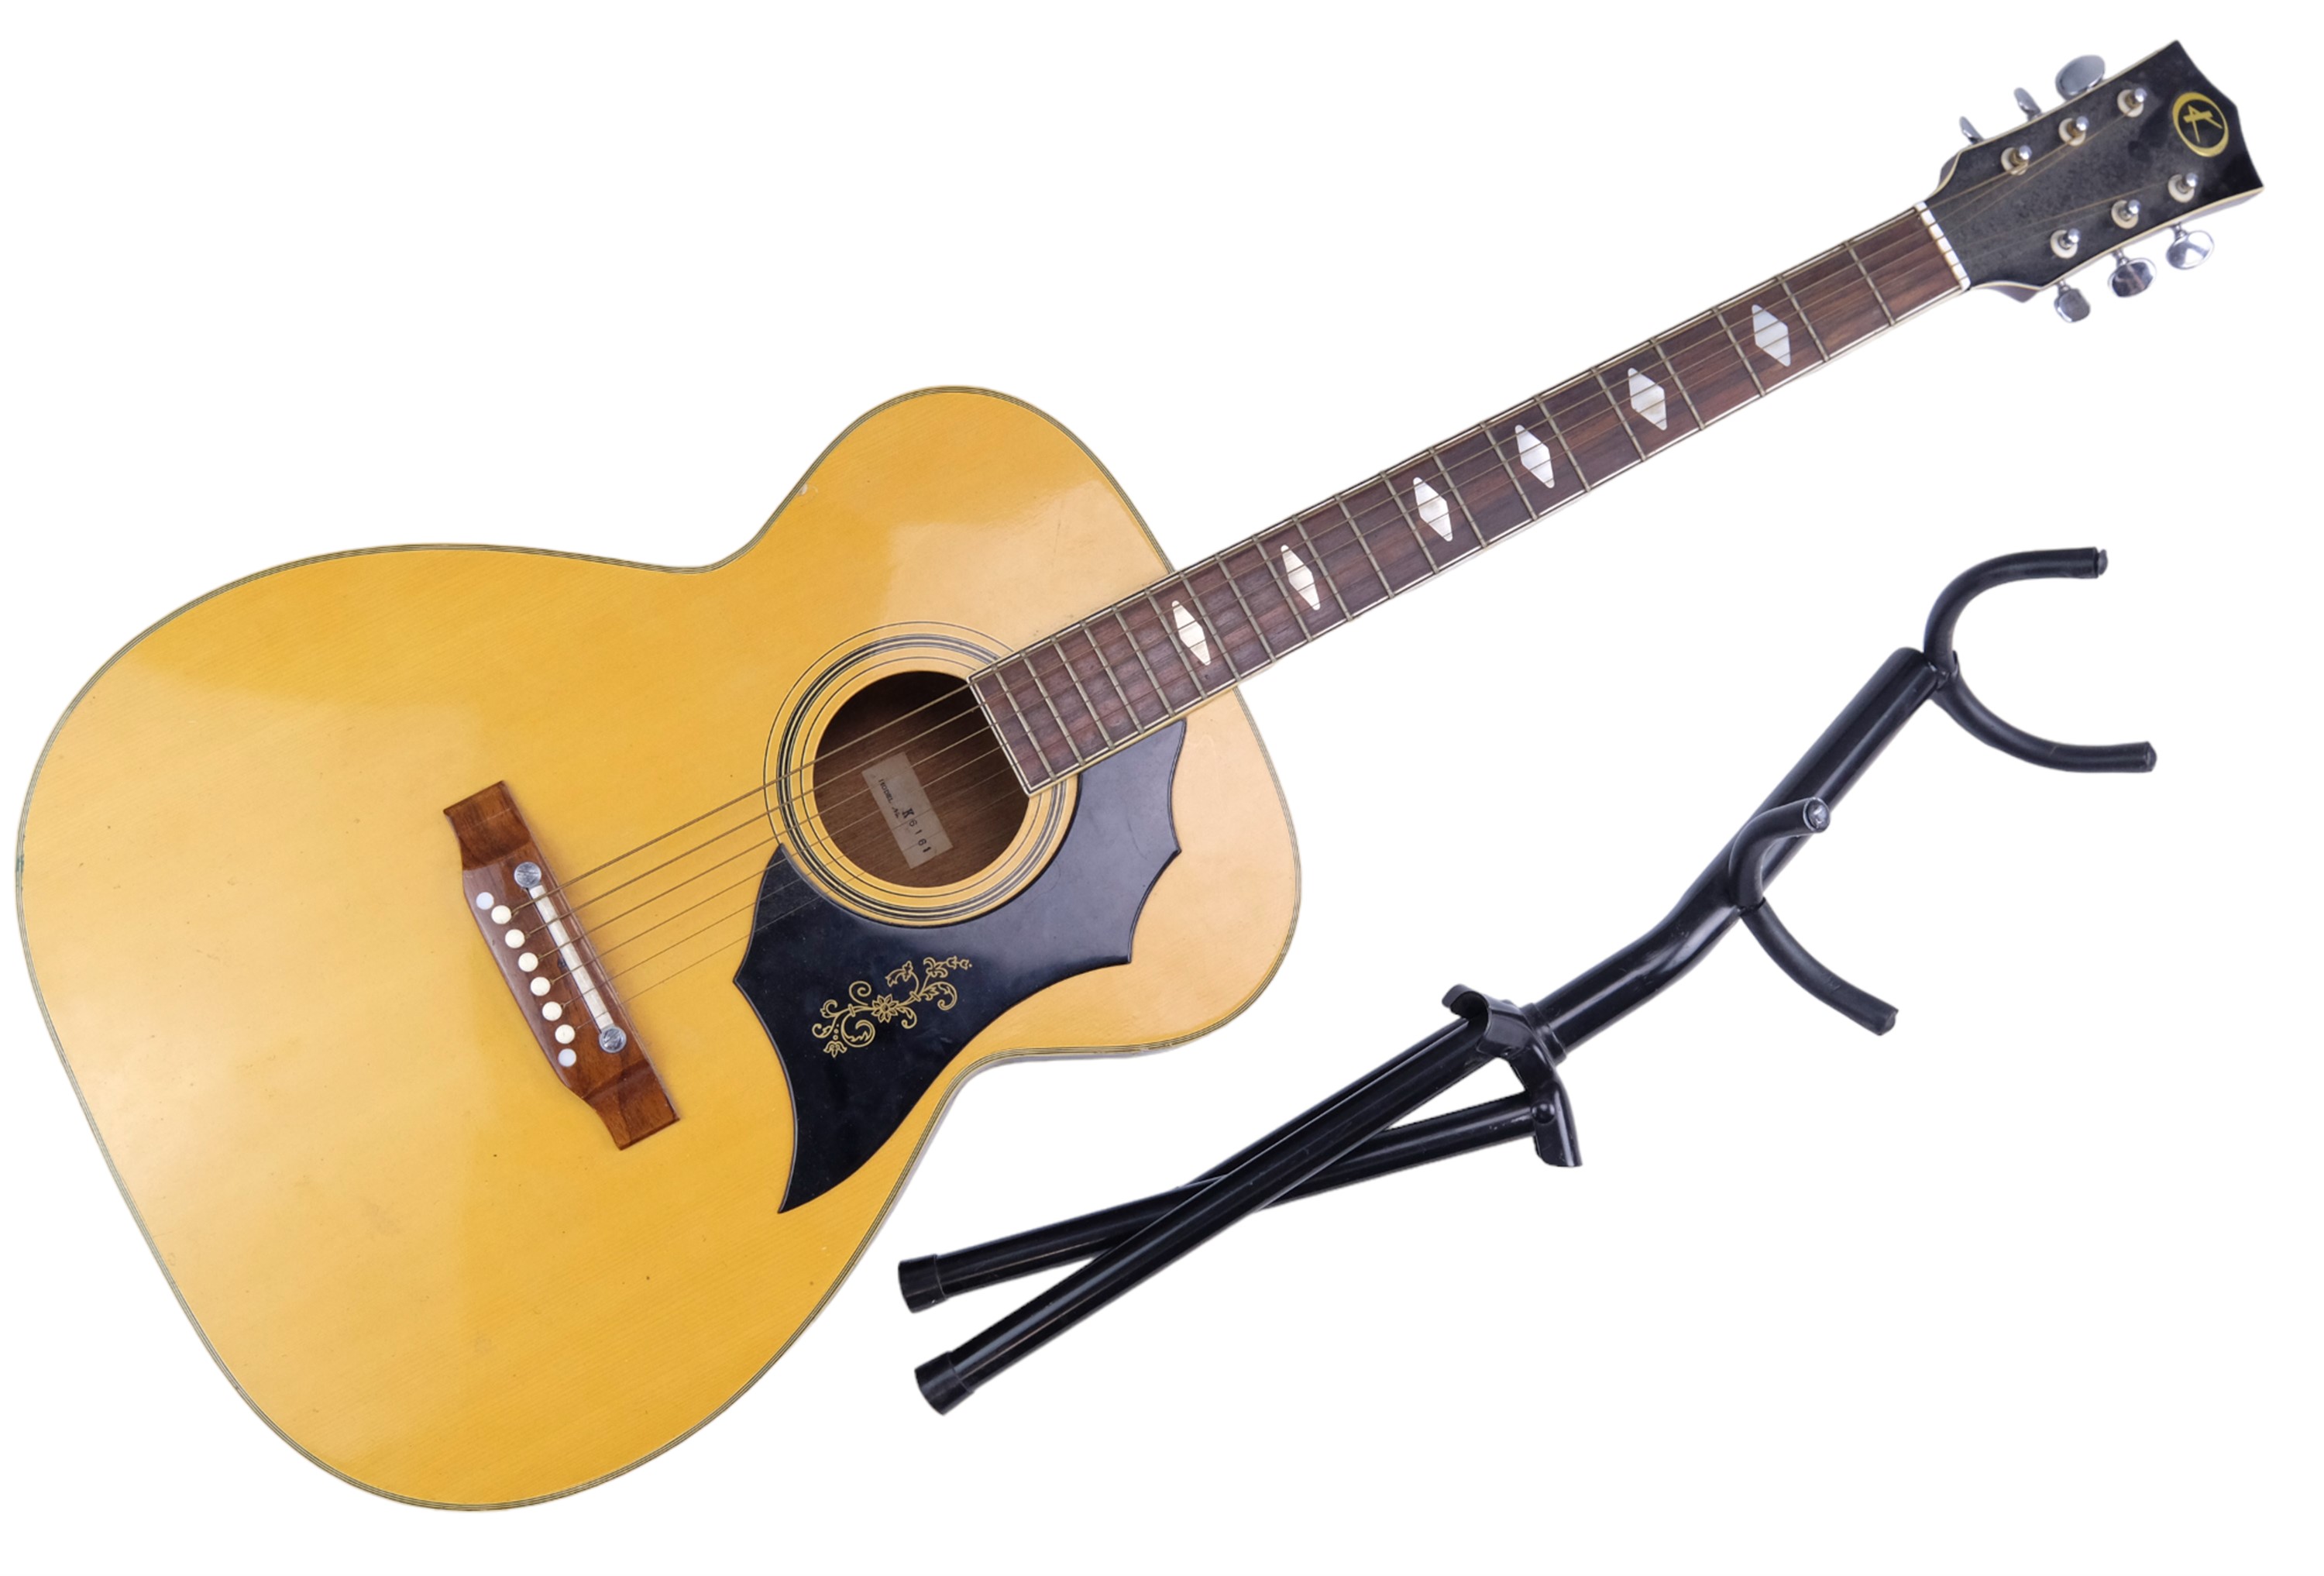 A Kay acoustic guitar, model number K6161, together with a stand, Kay 102 cm